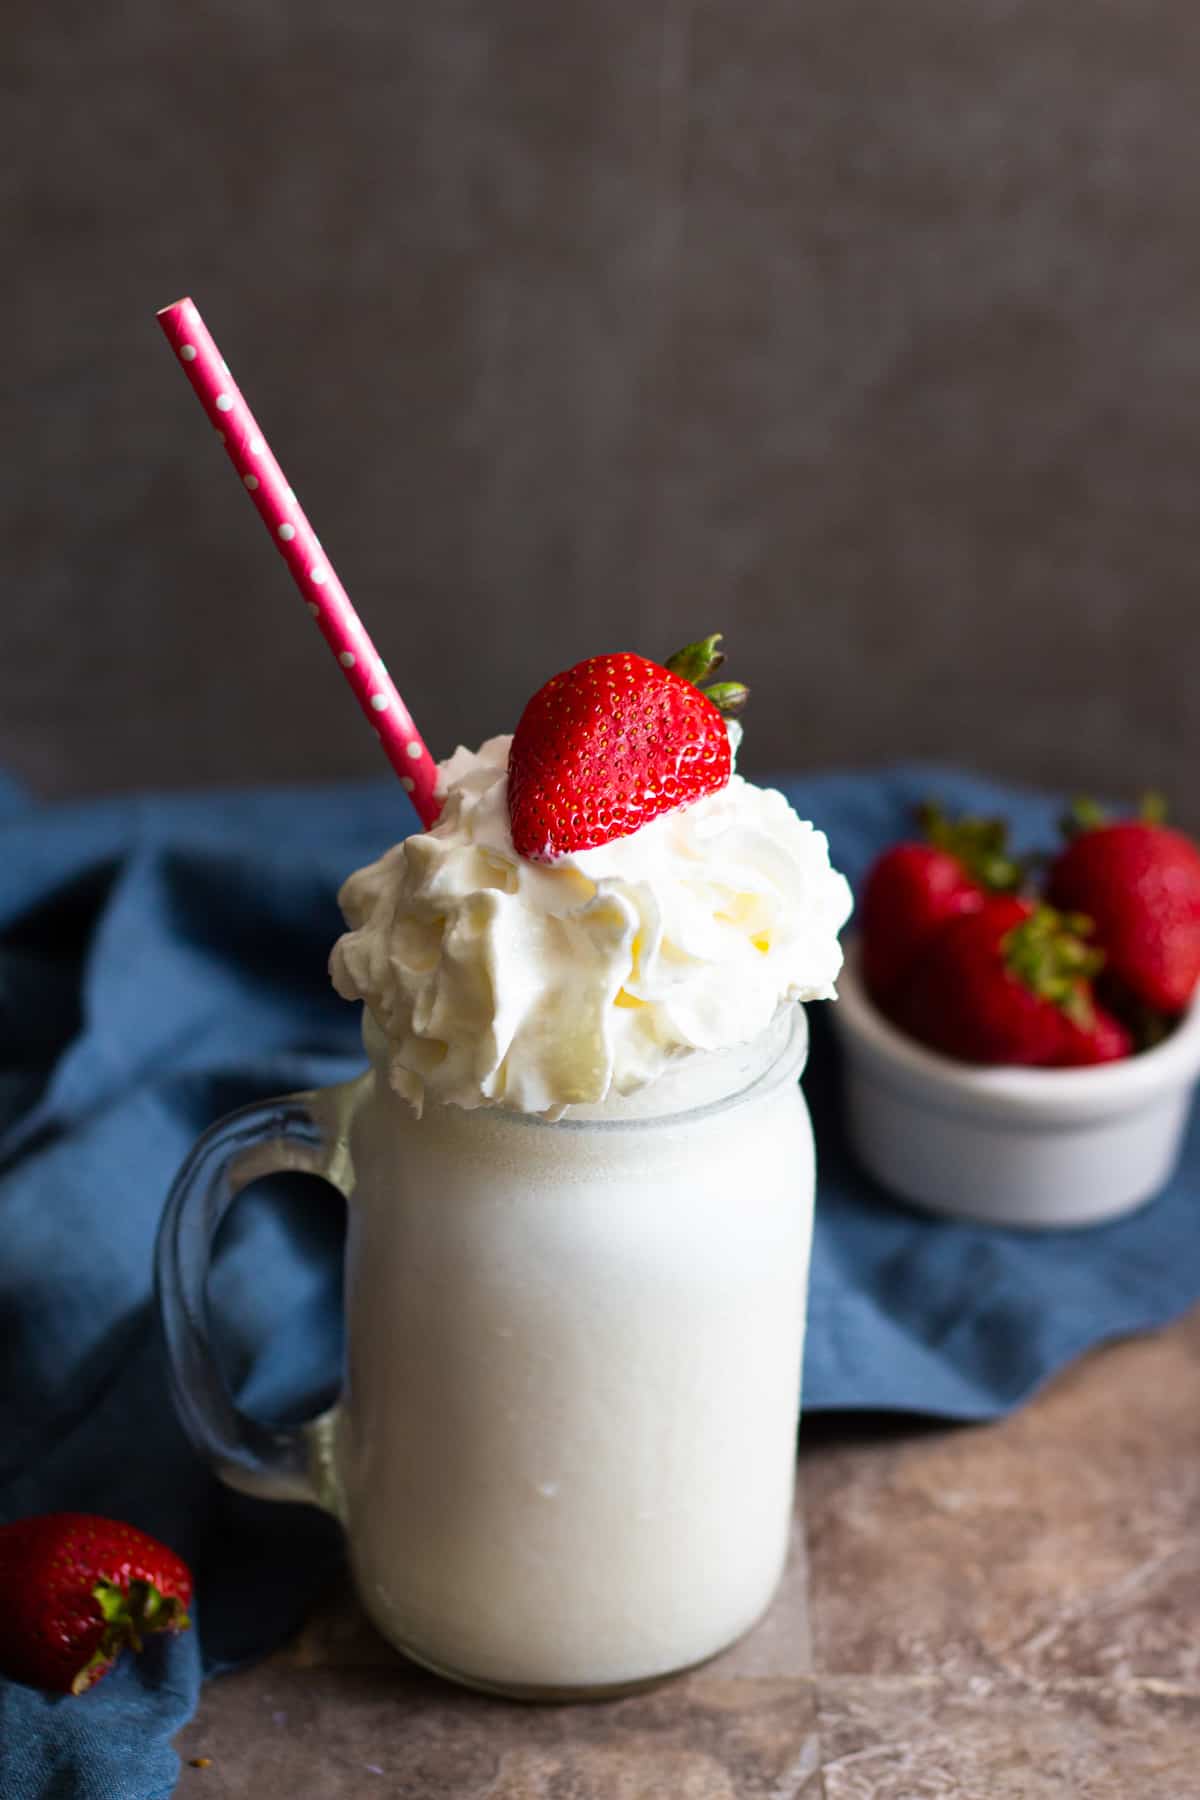 Vanilla milkshake is probably the most-loved milkshake in the world. Learn how to make the best homemade vanilla milkshake and enjoy it any time of the year.